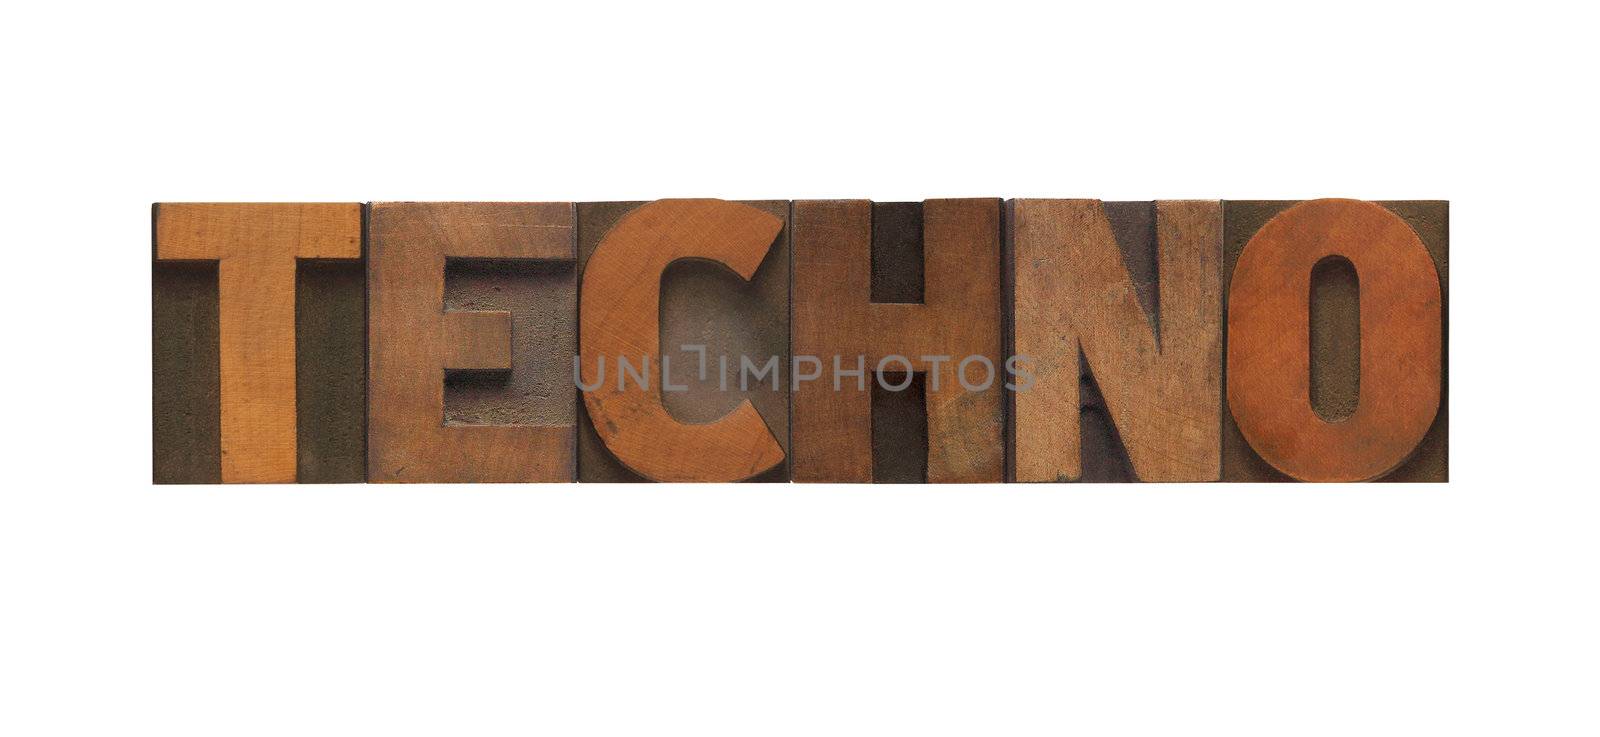 the word techno in old letterpress wood type